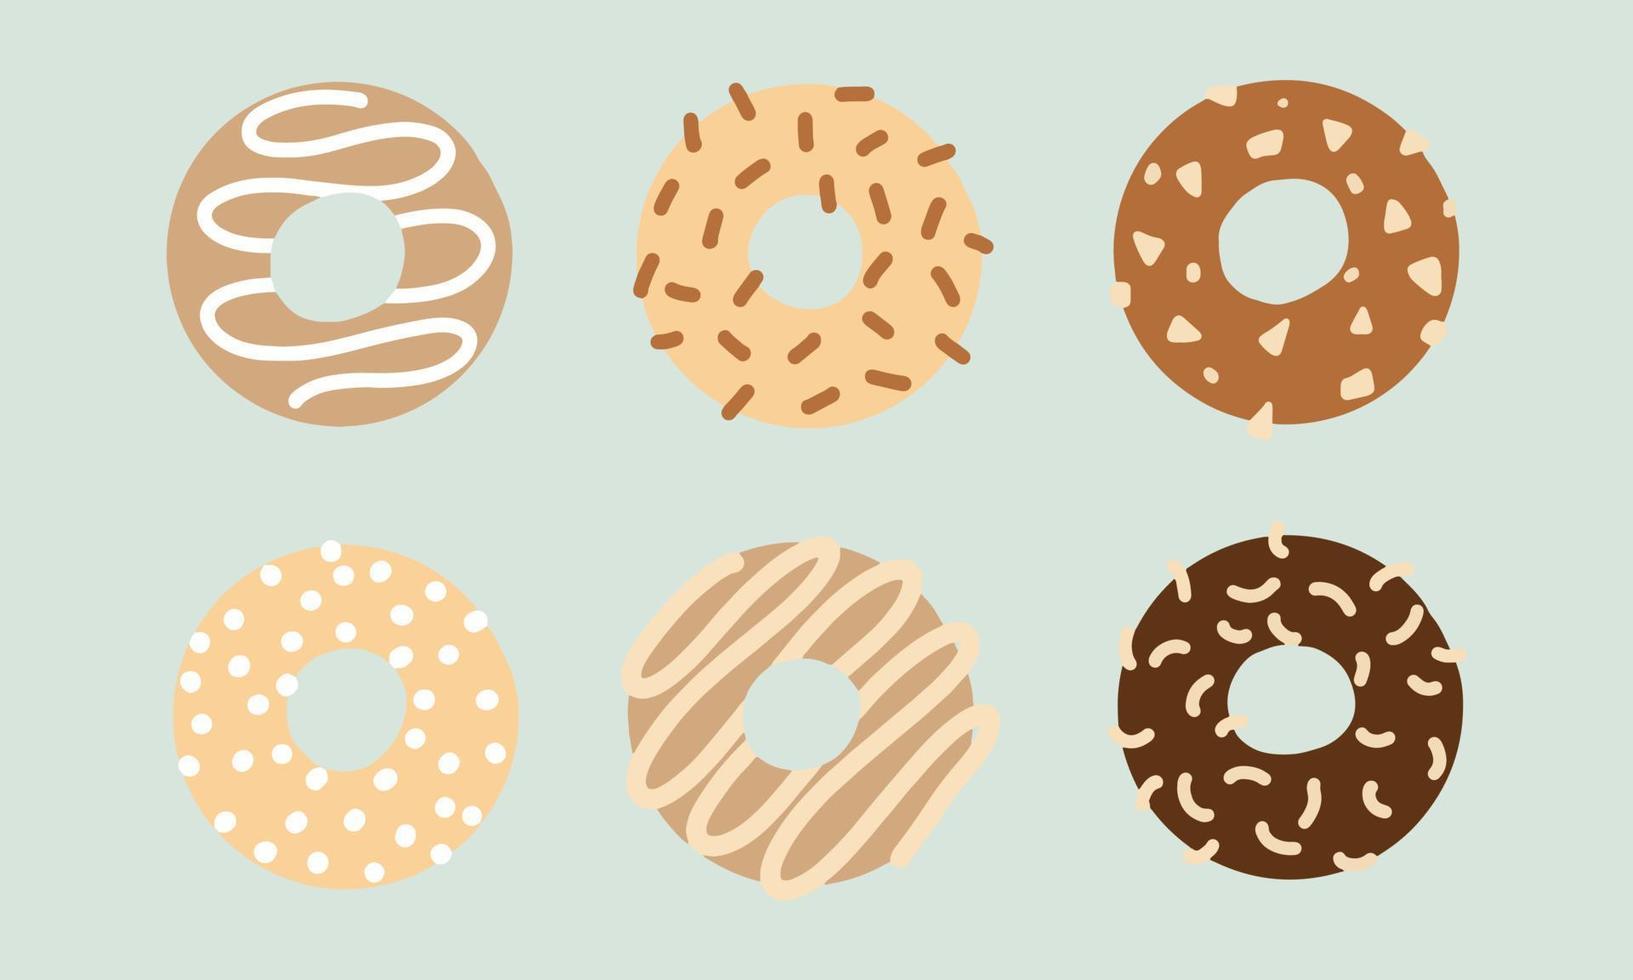 Flat design illustrations of donuts with various toppings. vector